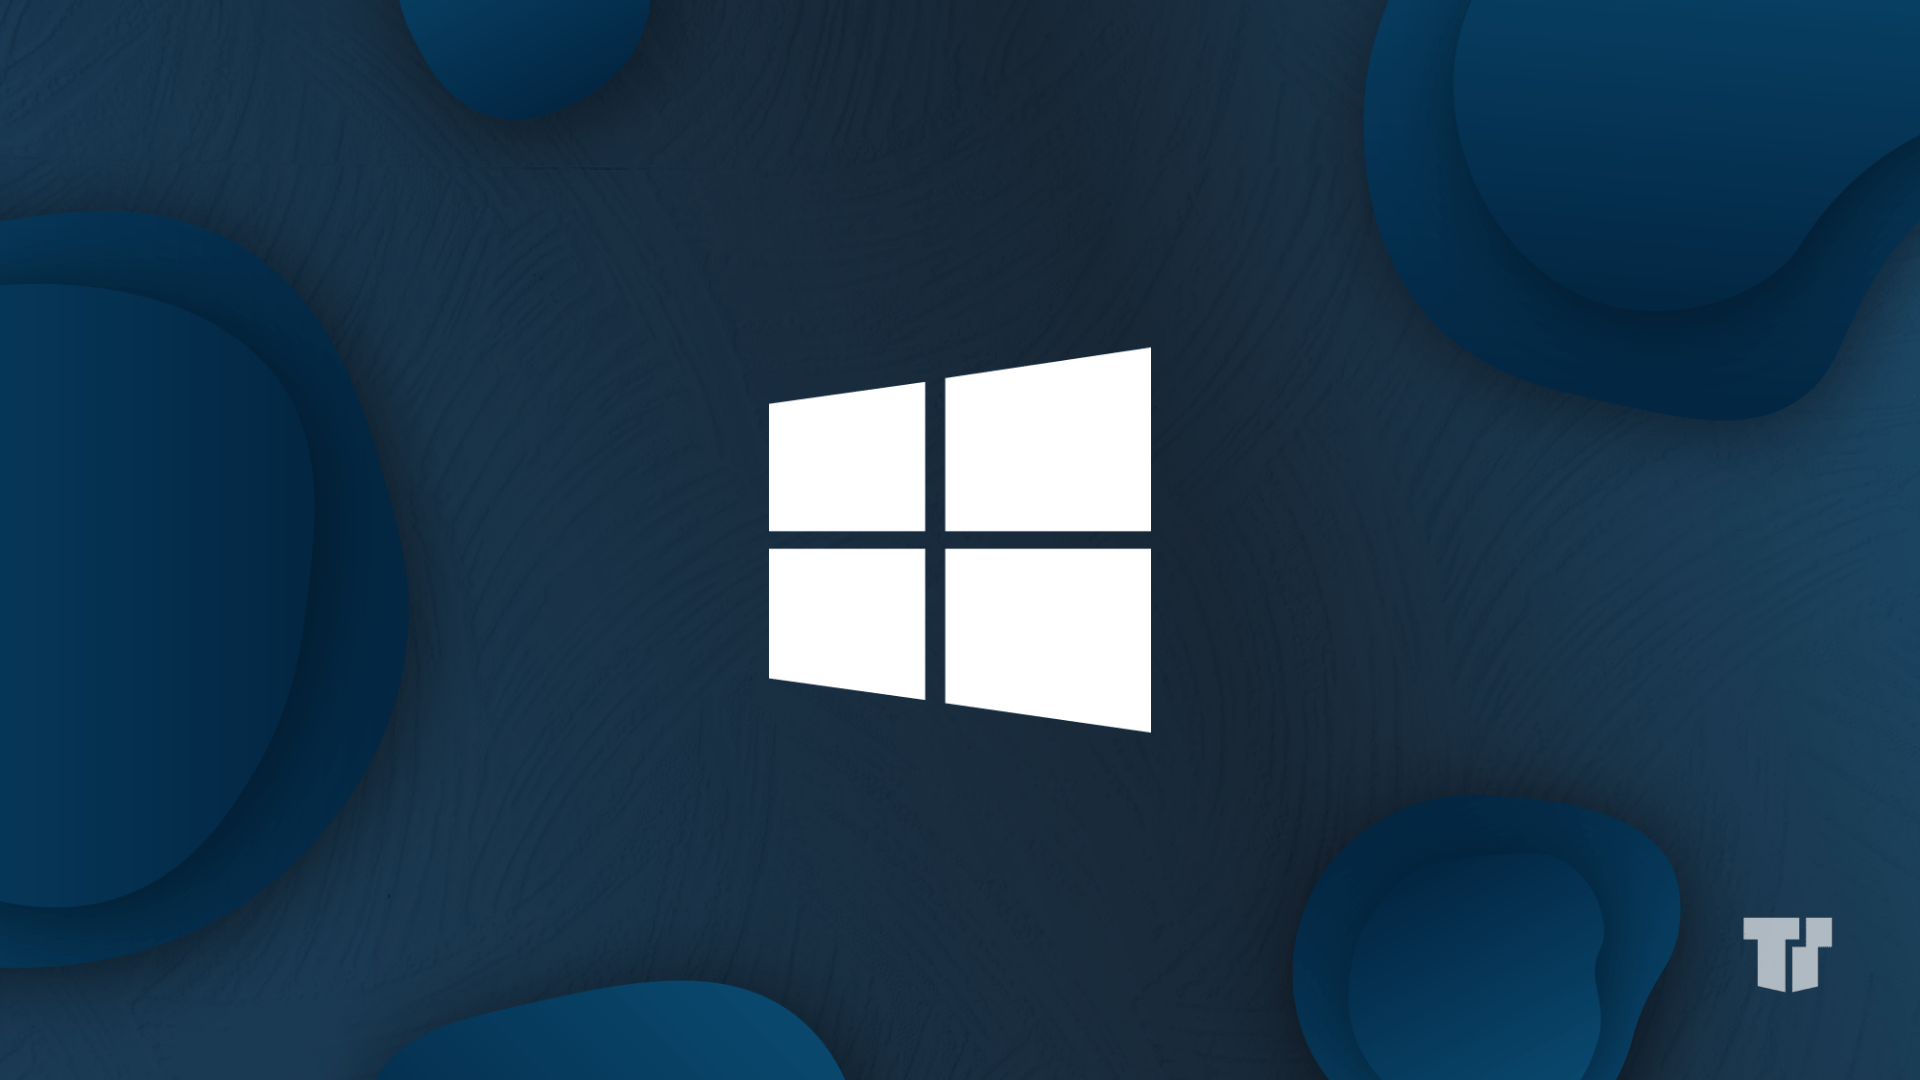 Windows 10: Why Should You Upgrade? cover image